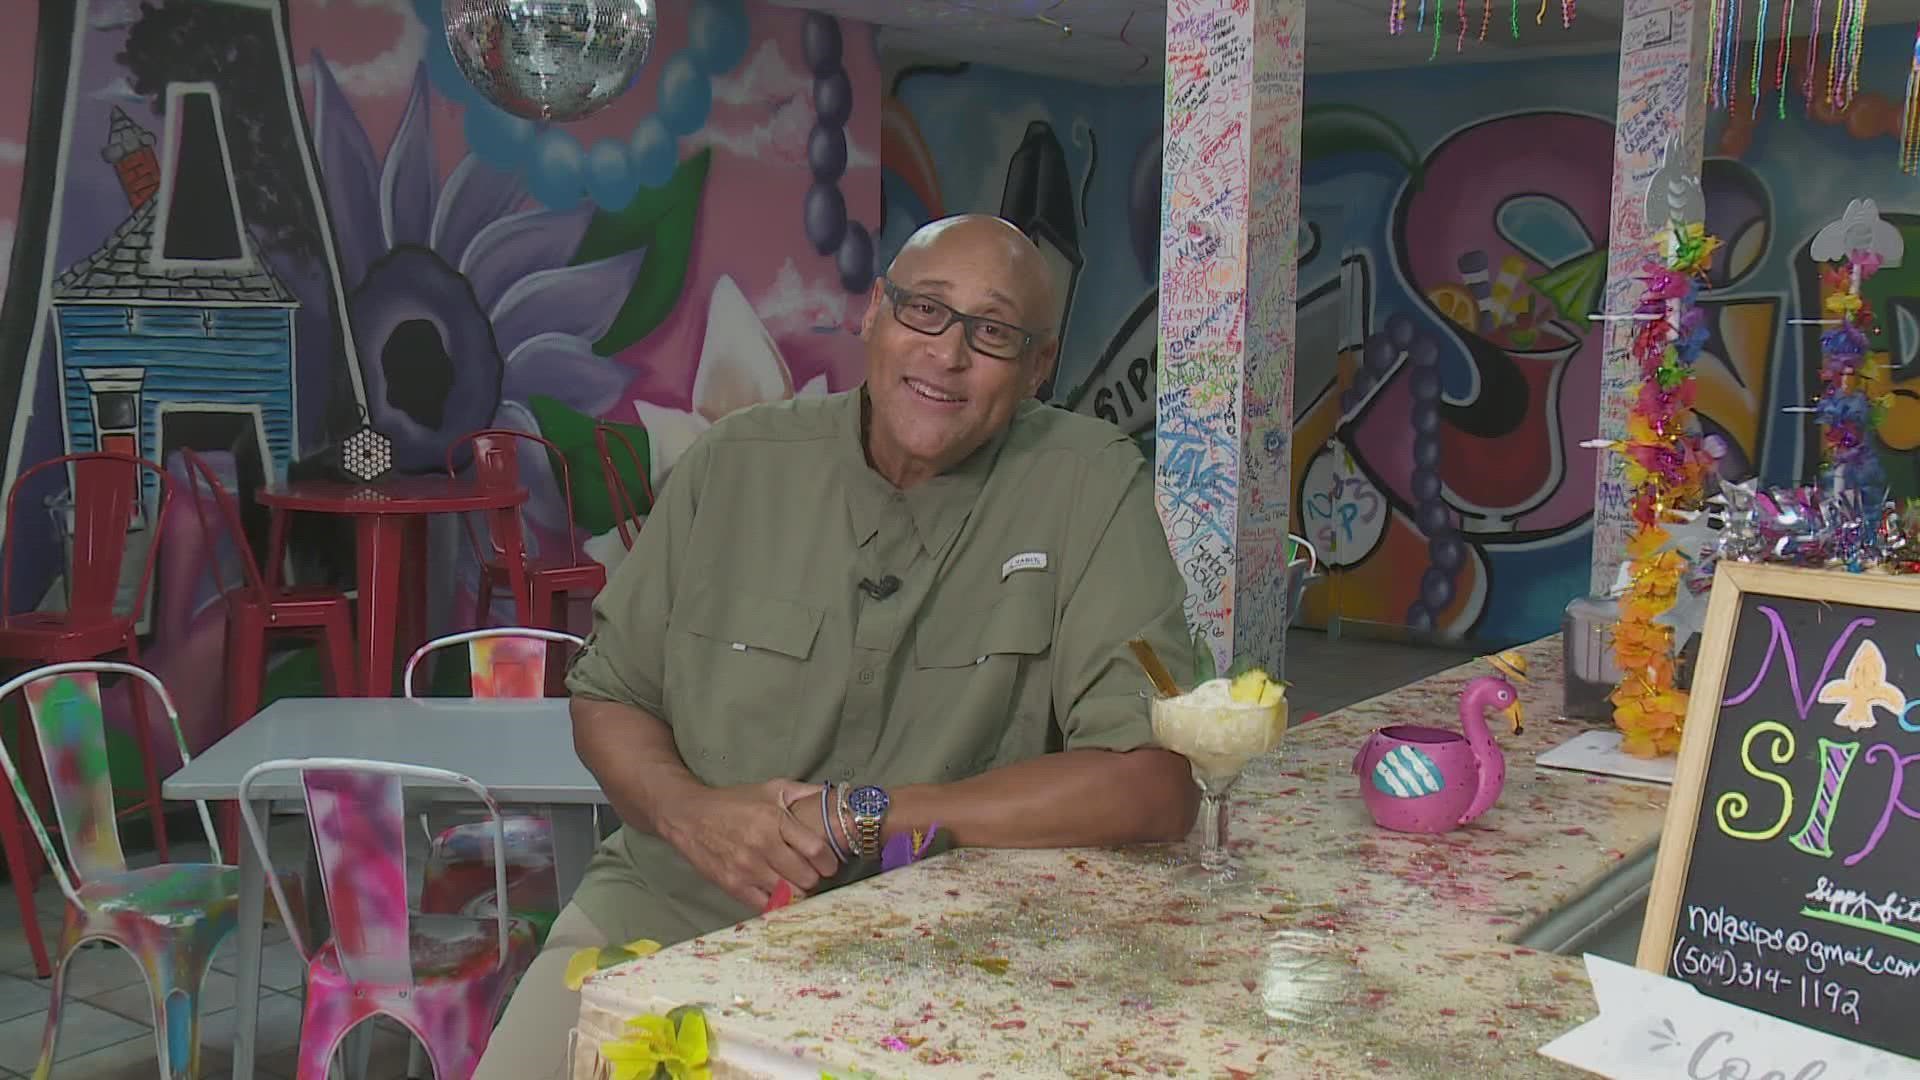 Chef Kevin Belton goes on a tour of New Orleans boozy sno-balls.